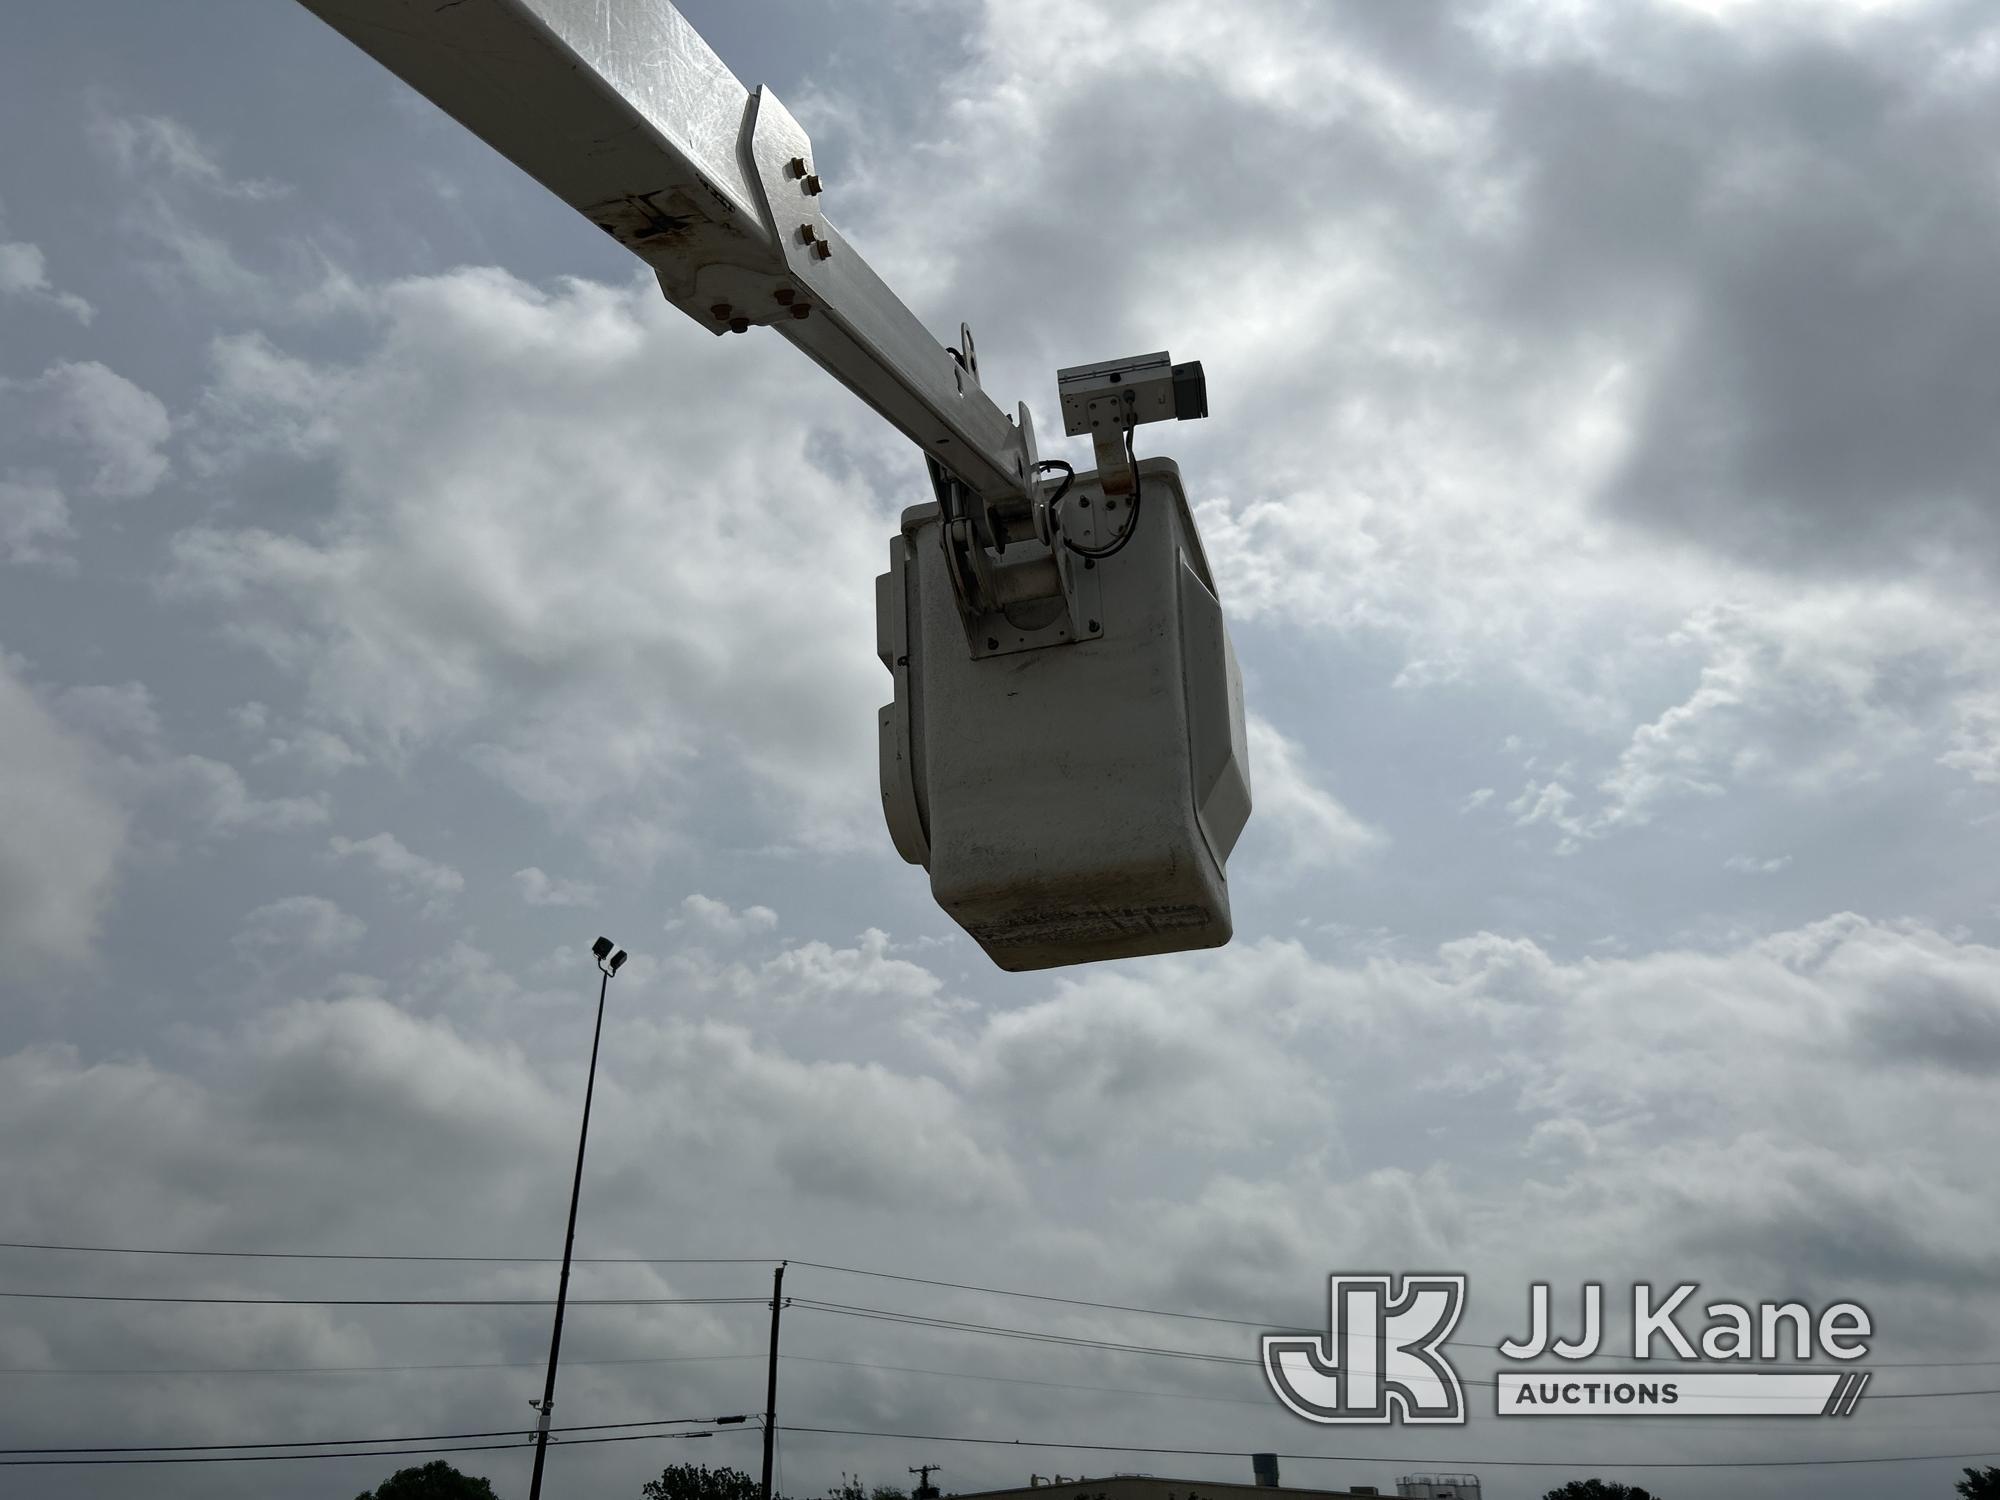 (Waxahachie, TX) Altec AT200A, Telescopic Non-Insulated Bucket Truck mounted behind cab on 2016 RAM